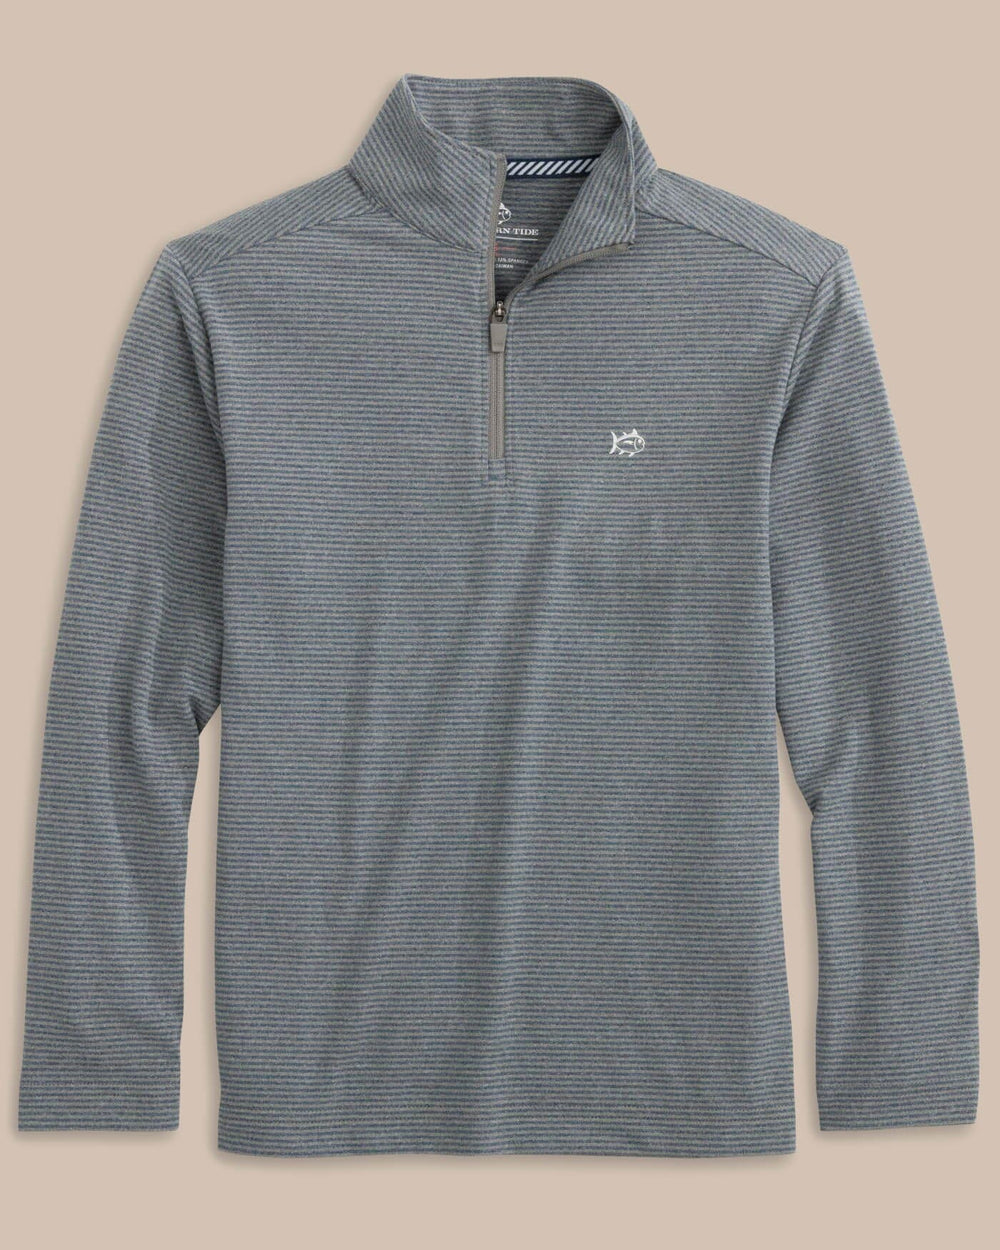 The front view of the Southern Tide Boys Cruiser Heather Micro-Stripe Quarter Zip Pullover by Southern Tide - Heather Shadow Grey